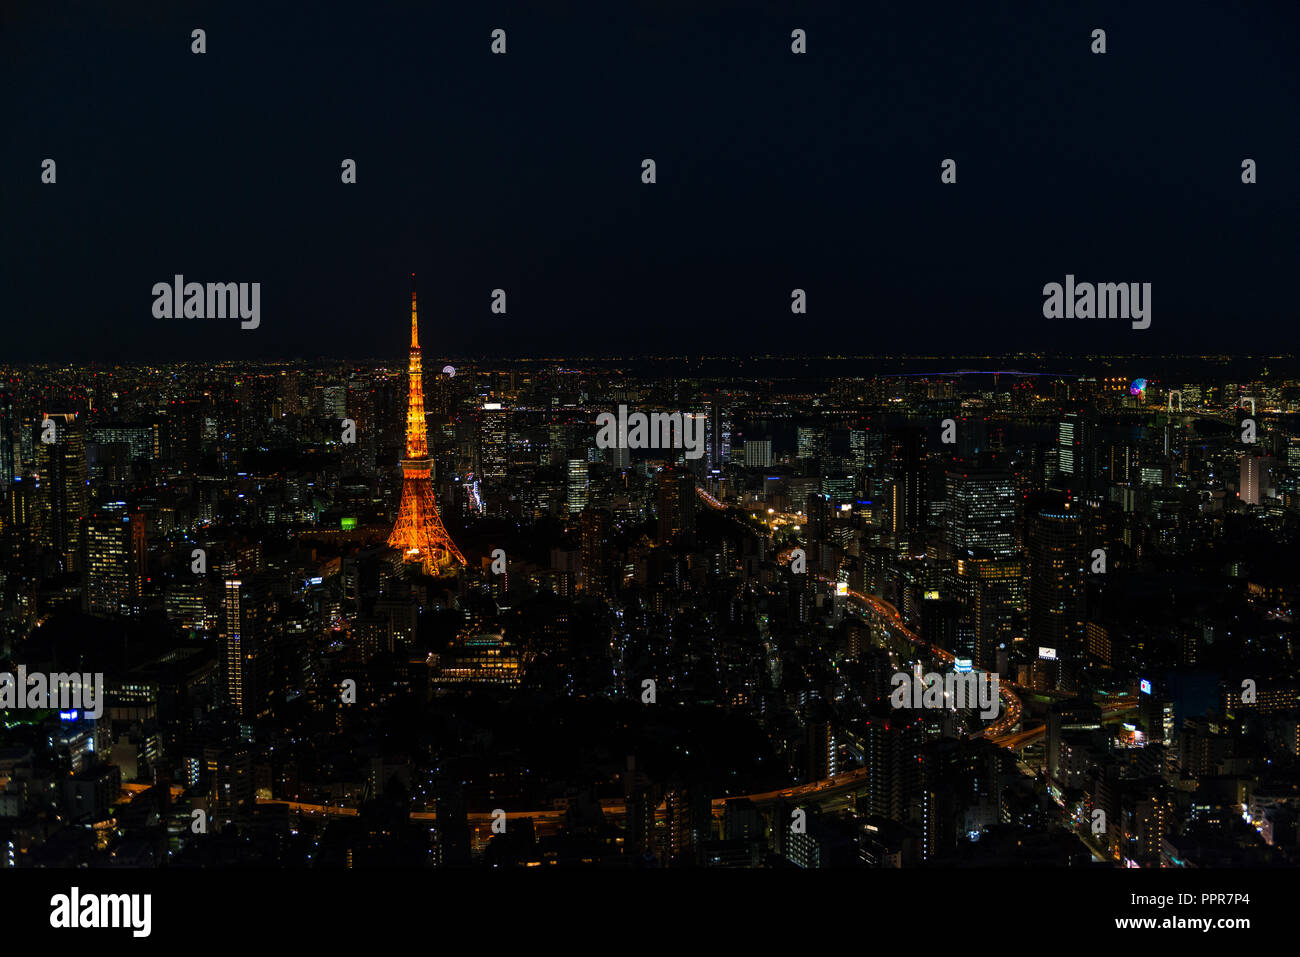 Cityscape of Tokyo at night, as seen from the top of one of the highest buildings in Roppongi Hills, with the illuminated Tokyo Tower glowing. Stock Photo